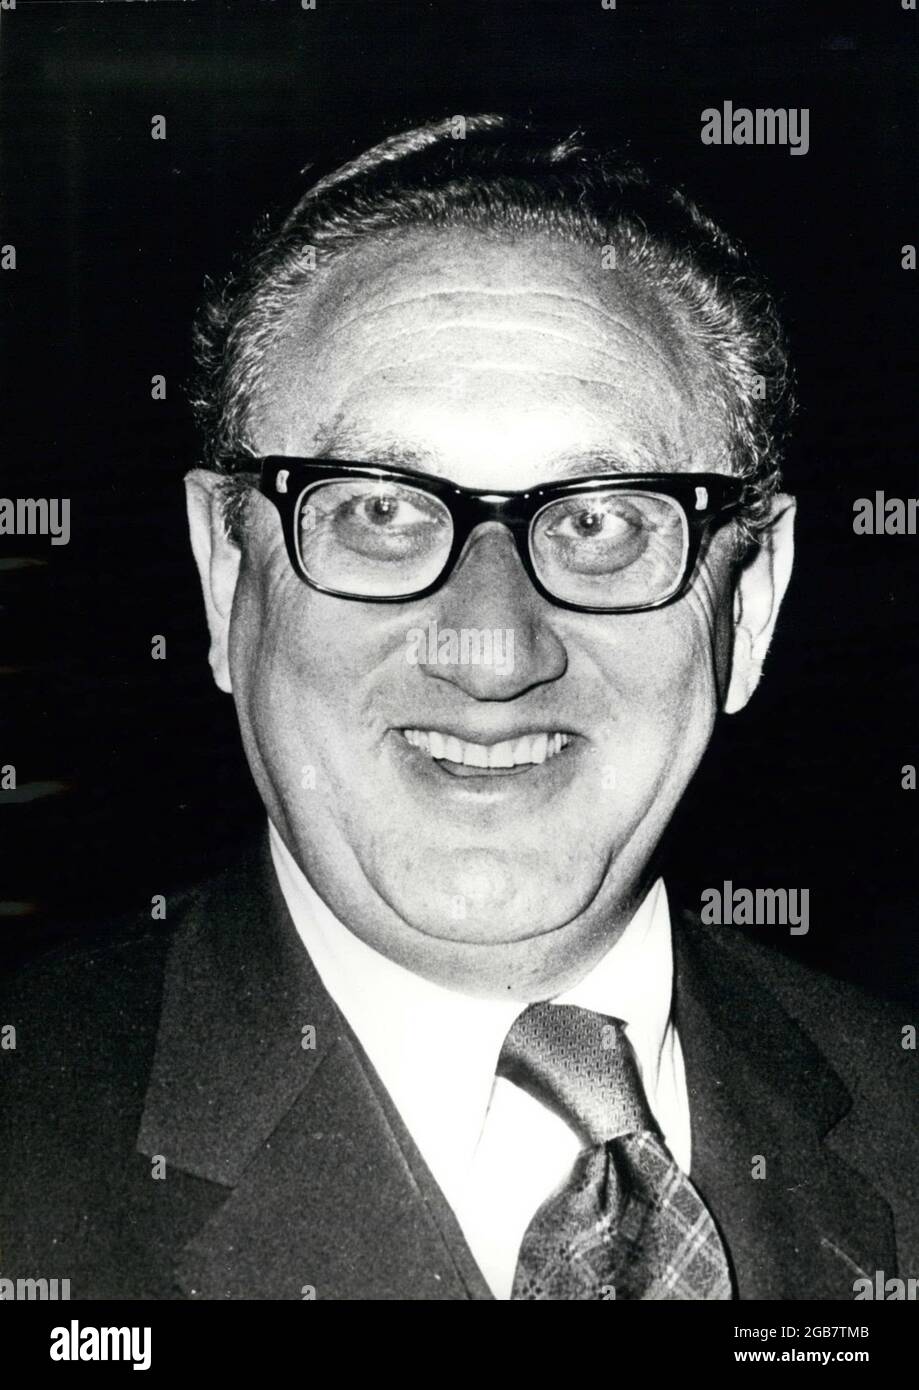 Jan 1973 - Paris, France - Dr. HENRY KISSINGER, President Nixon's special envoy in the Vietnam peace negotiations, is all smiles in this new picture. Credit: Keystone Press Agency/ZUMA Wire/Alamy Live News Stock Photo